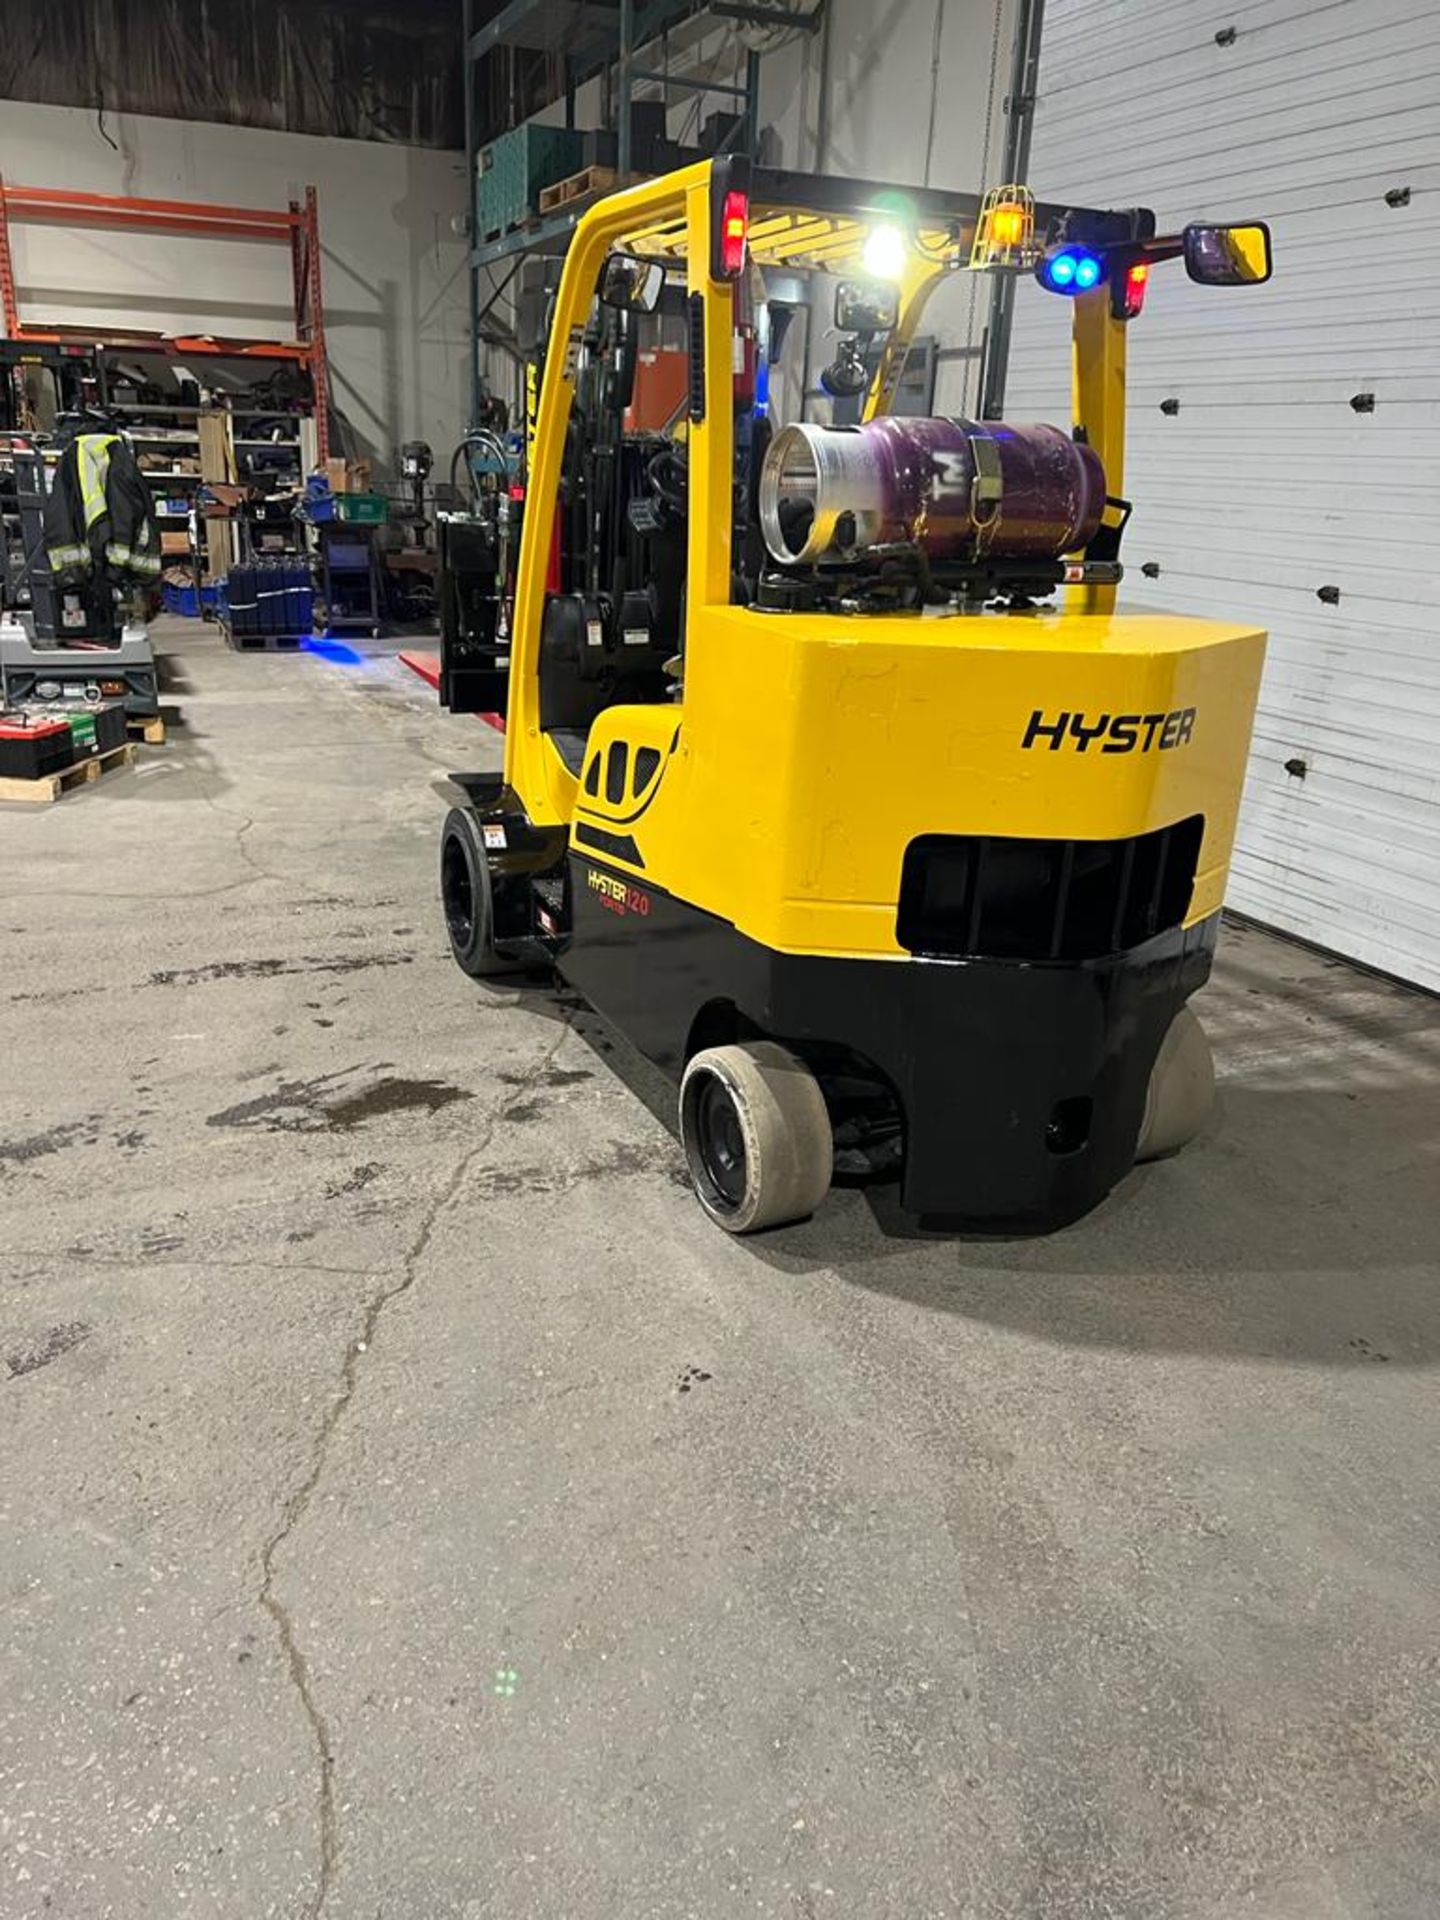 MINT ** 2017 Hyster 12,000lbs Capacity Forklift NEW 72" Forks, NEW Sideshift with NEW Positioner - - Image 4 of 4